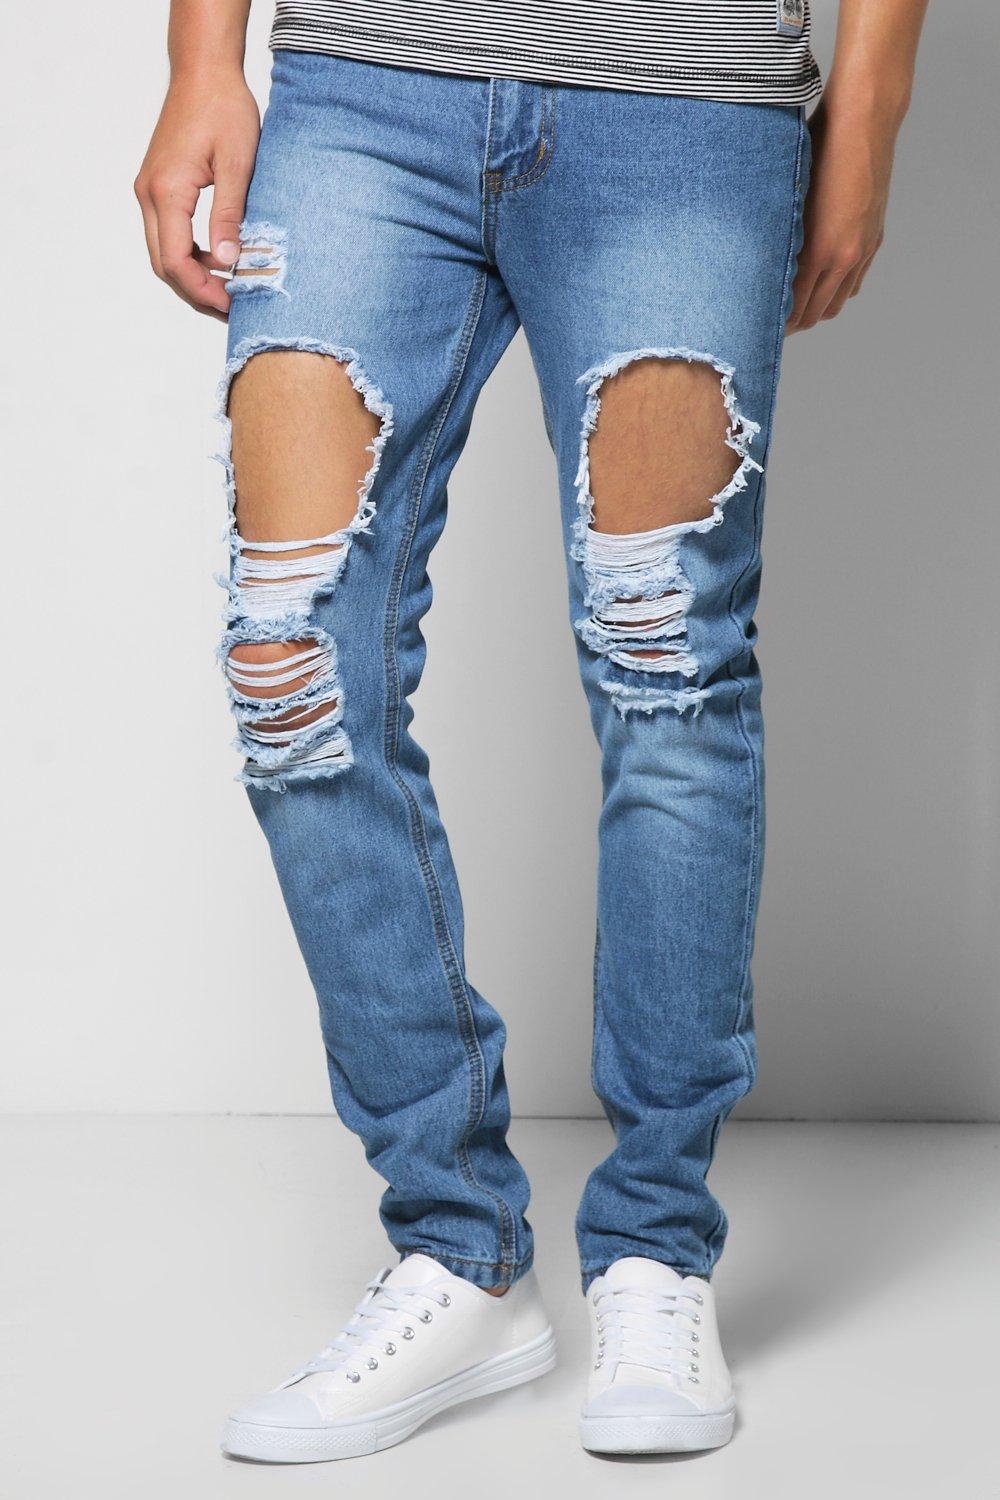 really ripped jeans mens